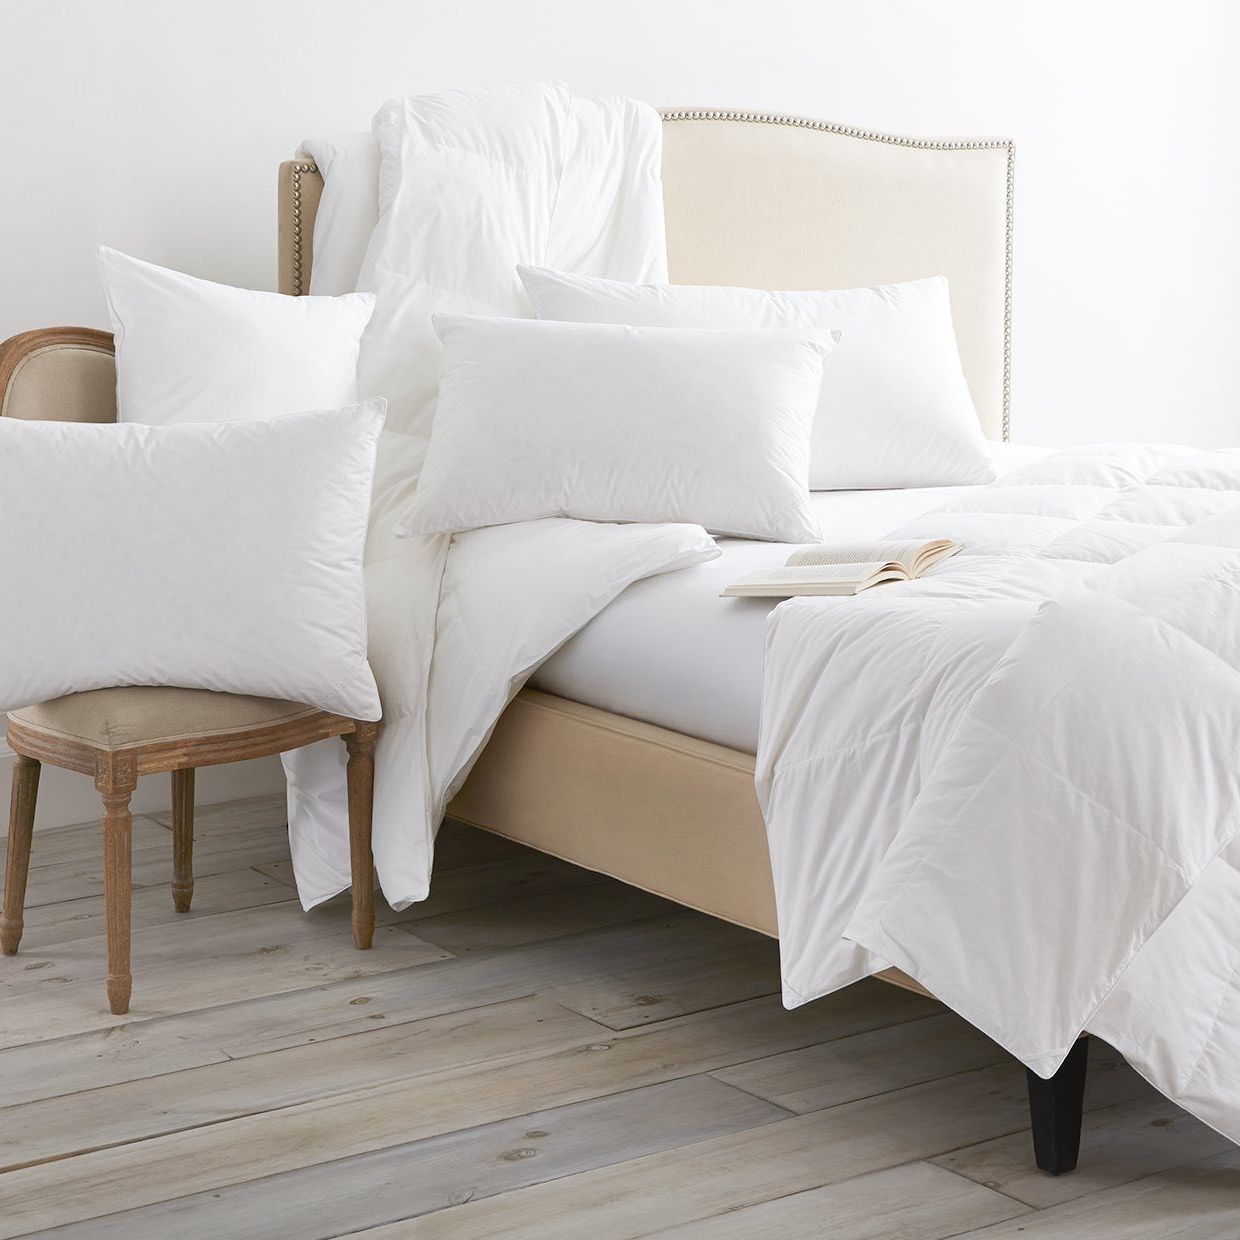 10+ Best Pillows to Buy in 2019 for Side, Back, and Stomach Sleepers